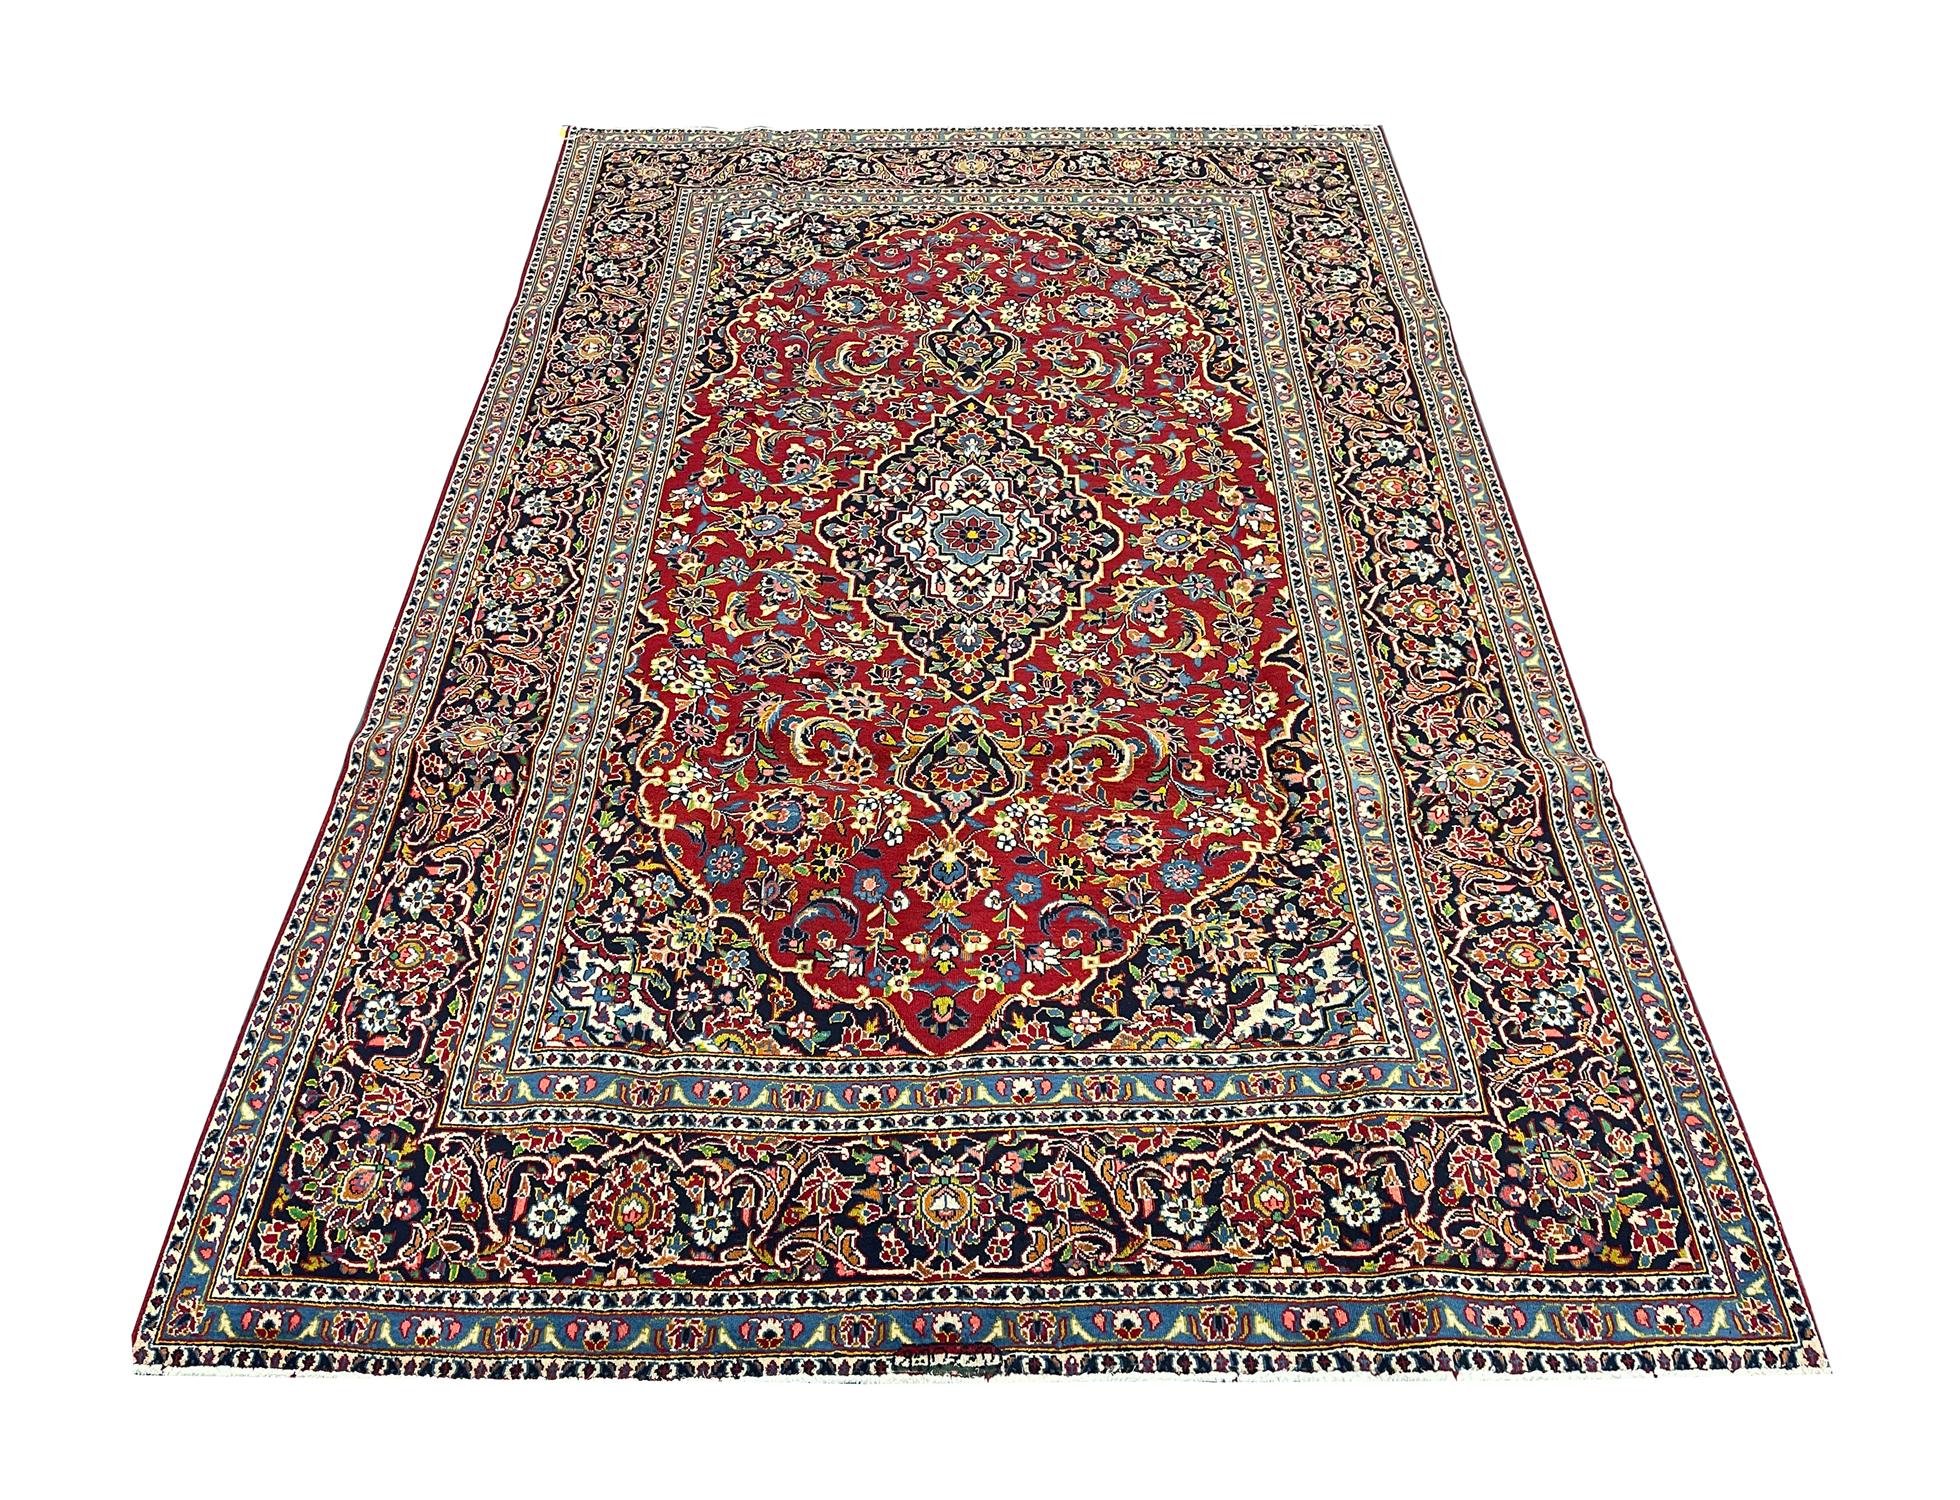 This elegant, rich red rug features a highly-detailed all over and surrounding design. It is decorated with a beautiful array of floral motifs woven symmetrically to create a decorative masterpiece. The enclosing border is woven on a contrasting